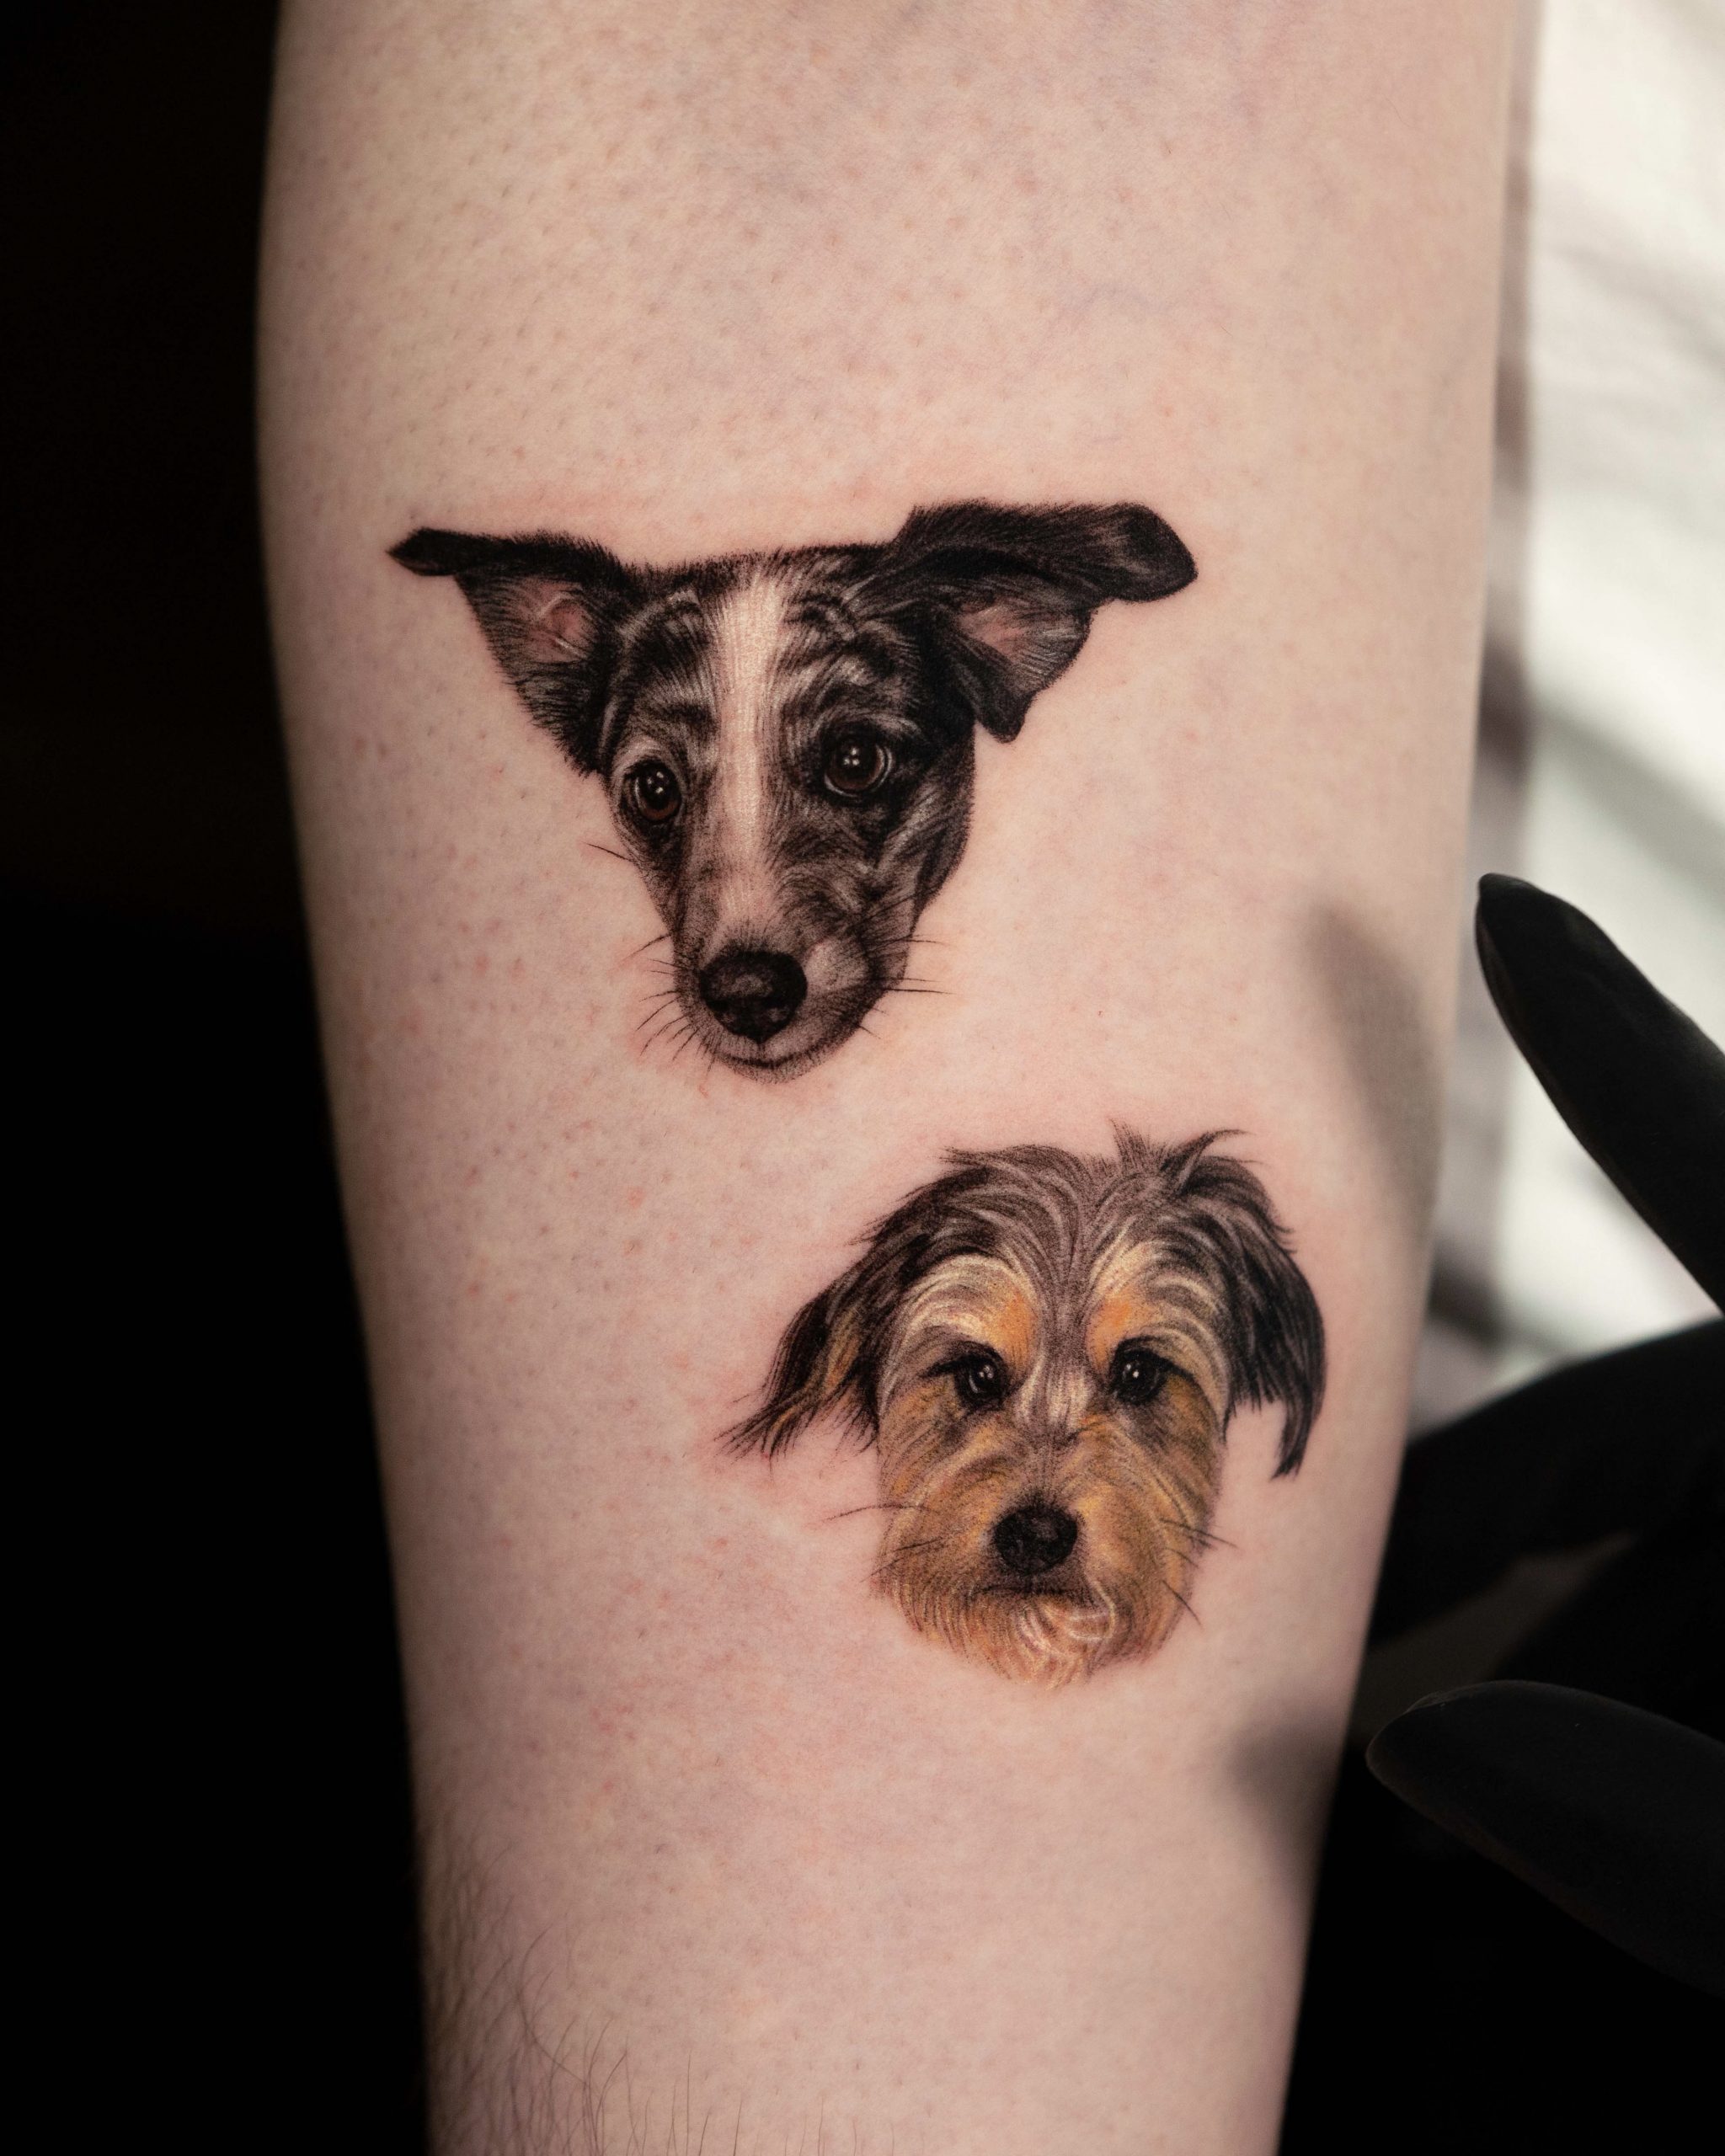 Top 9 Dog Tattoo Designs And Pictures | Styles At Life